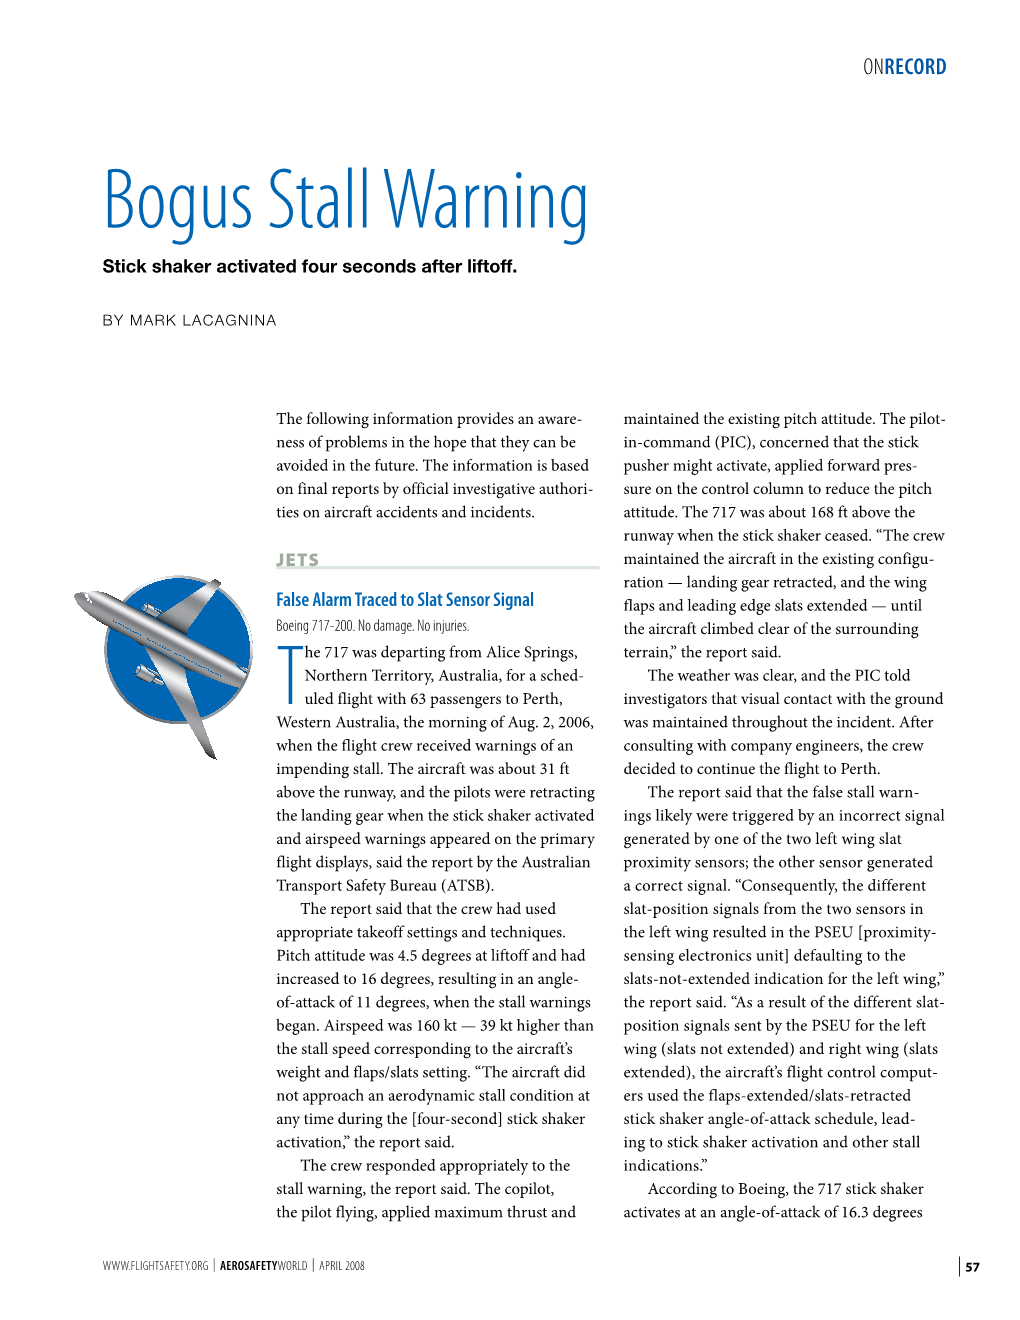 Bogus Stall Warning Stick Shaker Activated Four Seconds After Liftoff